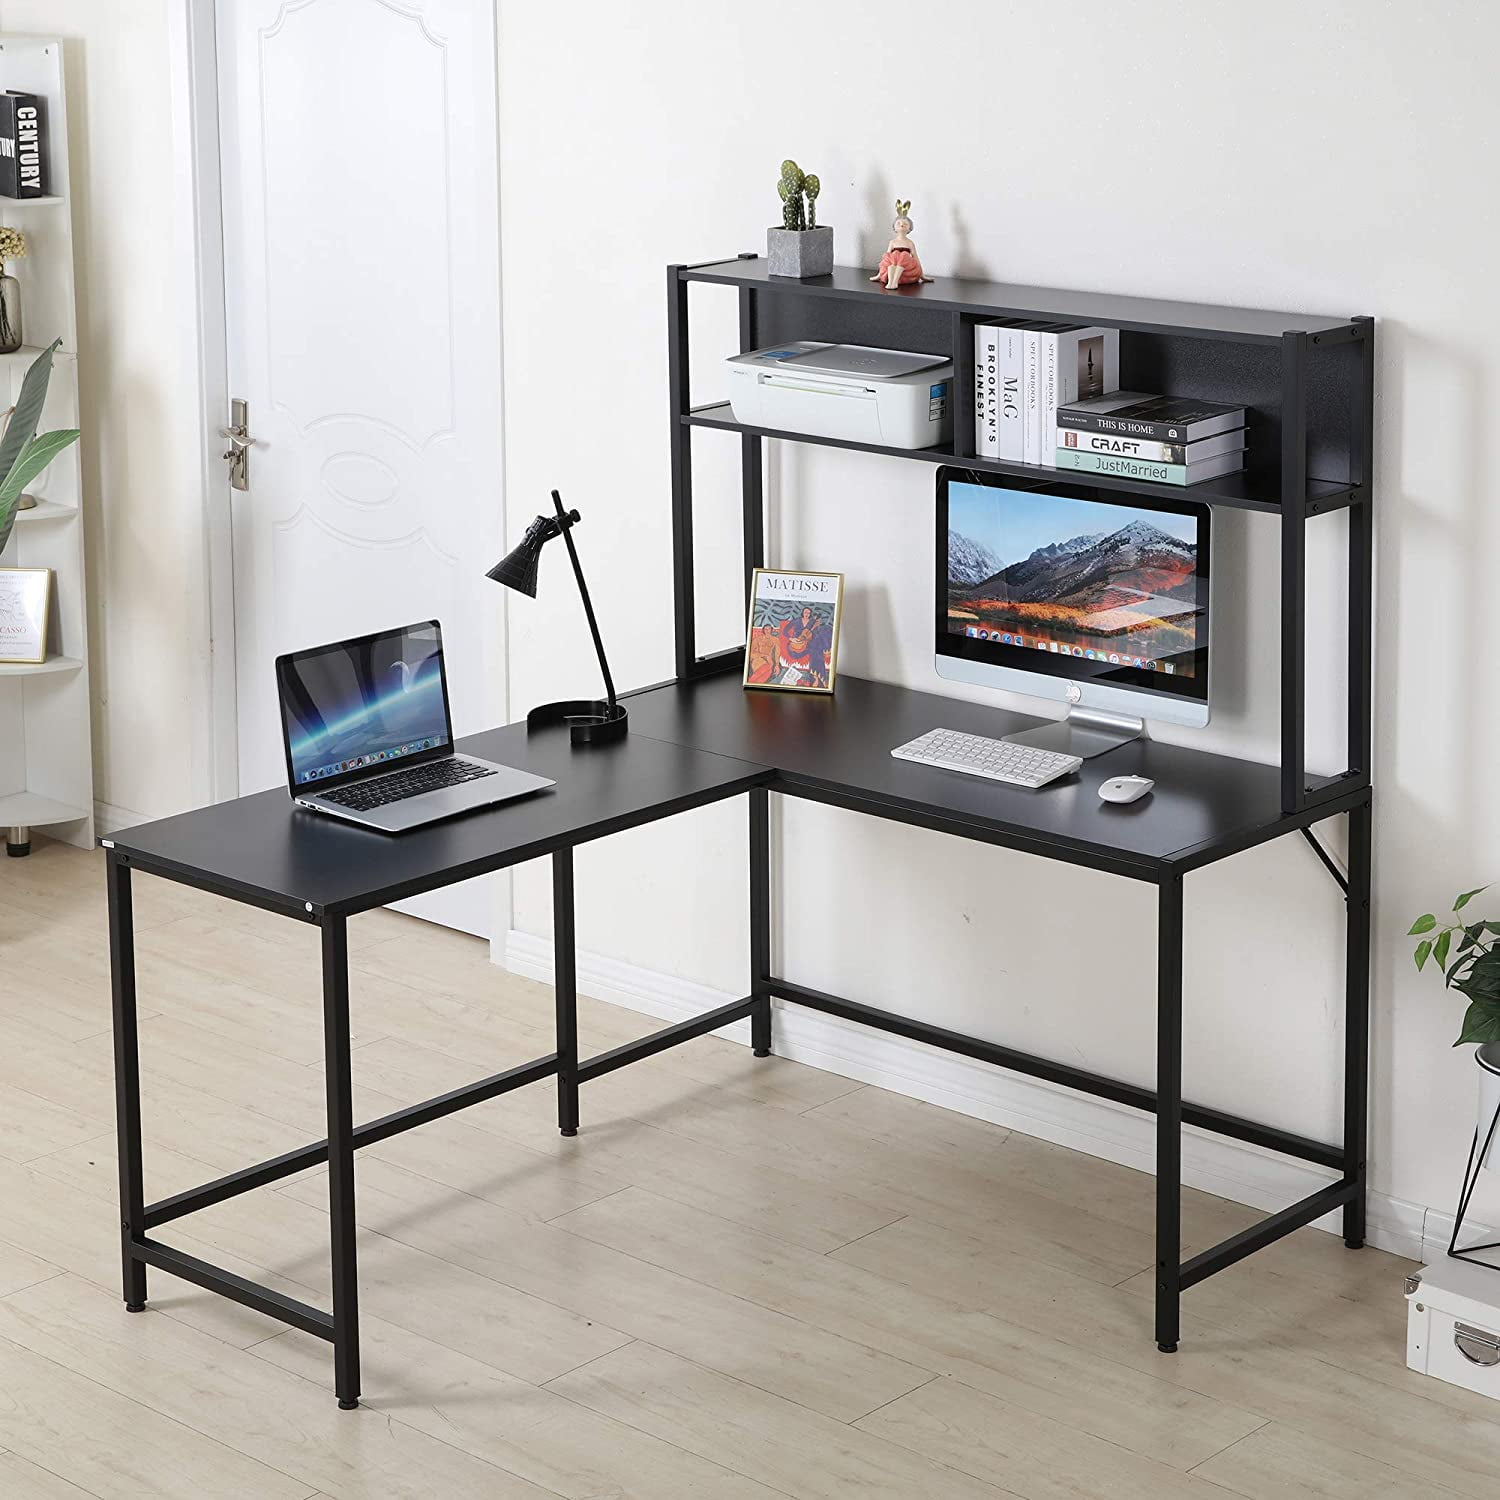 YOLENY 55 Inch L-Shaped Computer Desk with Hutch,Space-Saving Corner Desk with Storage Shelves,Home Office Desk Study Workstation for Home,Office 